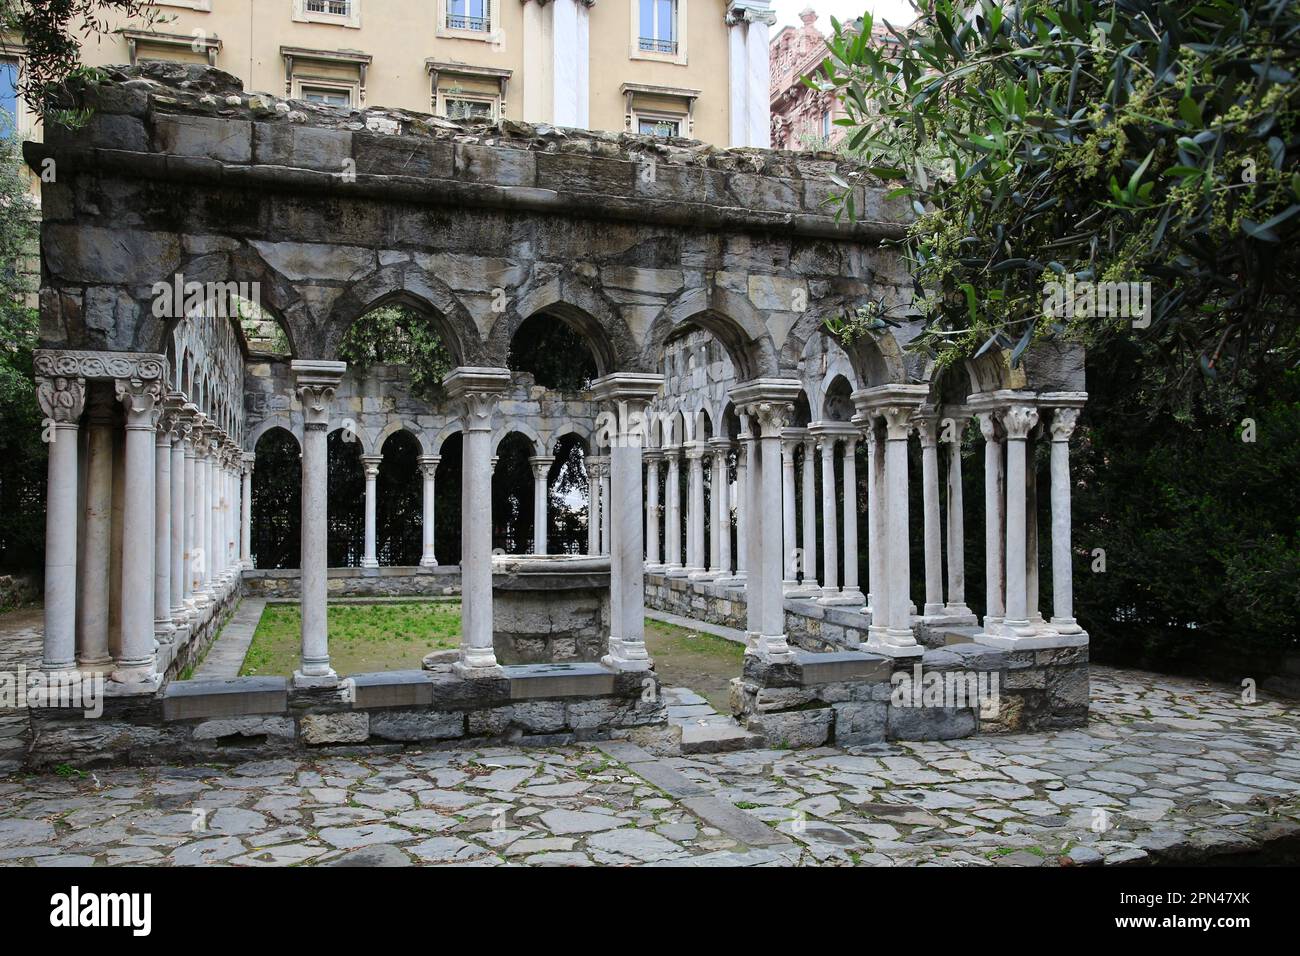 St Andrew cloister ruins in Genoa in the region of Liguria, Italy Stock Photo